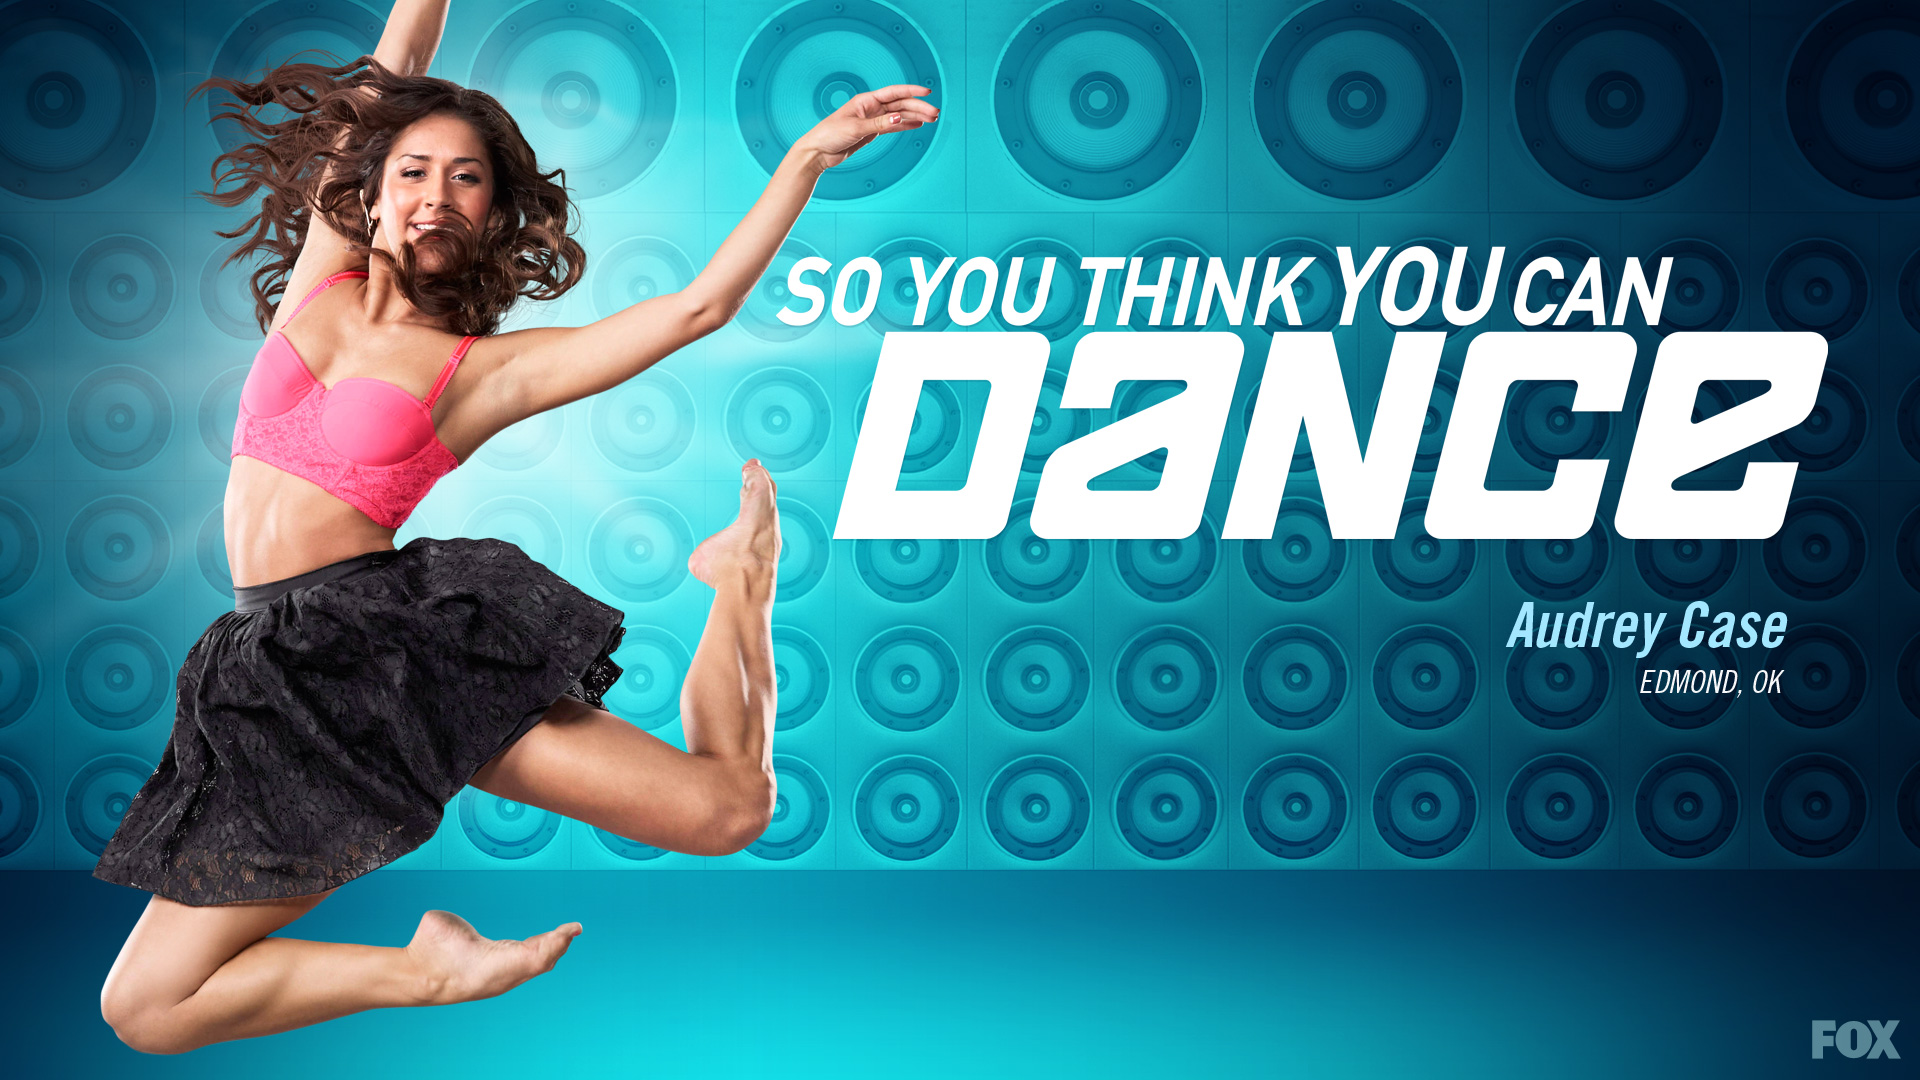 So You Think You Can Dance wallpaper 4